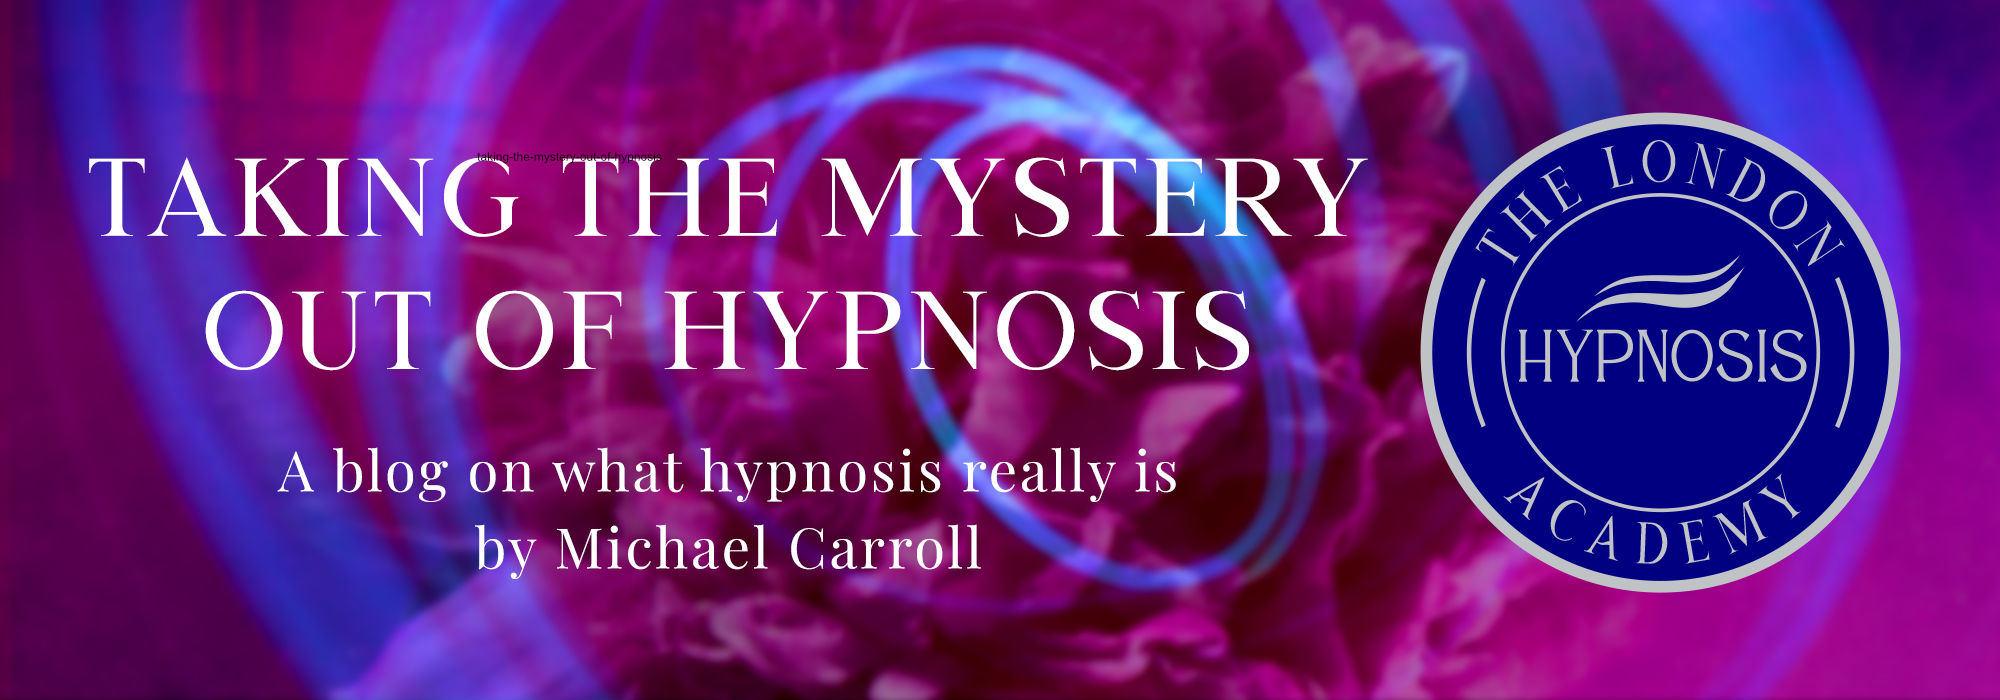 A blog on what hypnosis really is by Michael Carroll